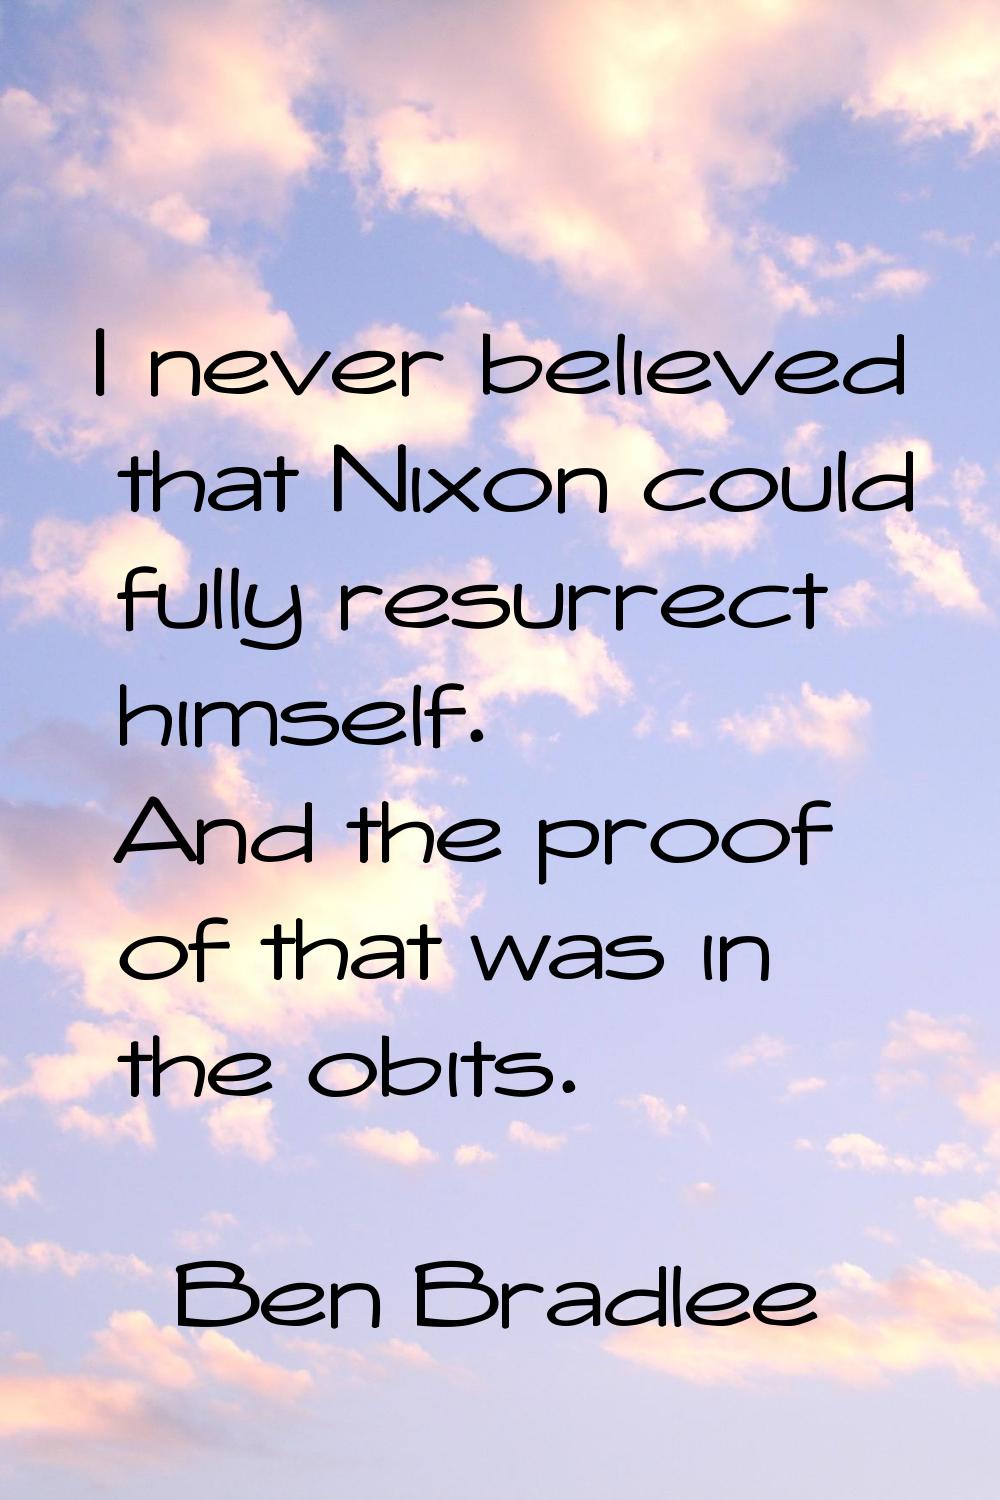 I never believed that Nixon could fully resurrect himself. And the proof of that was in the obits.